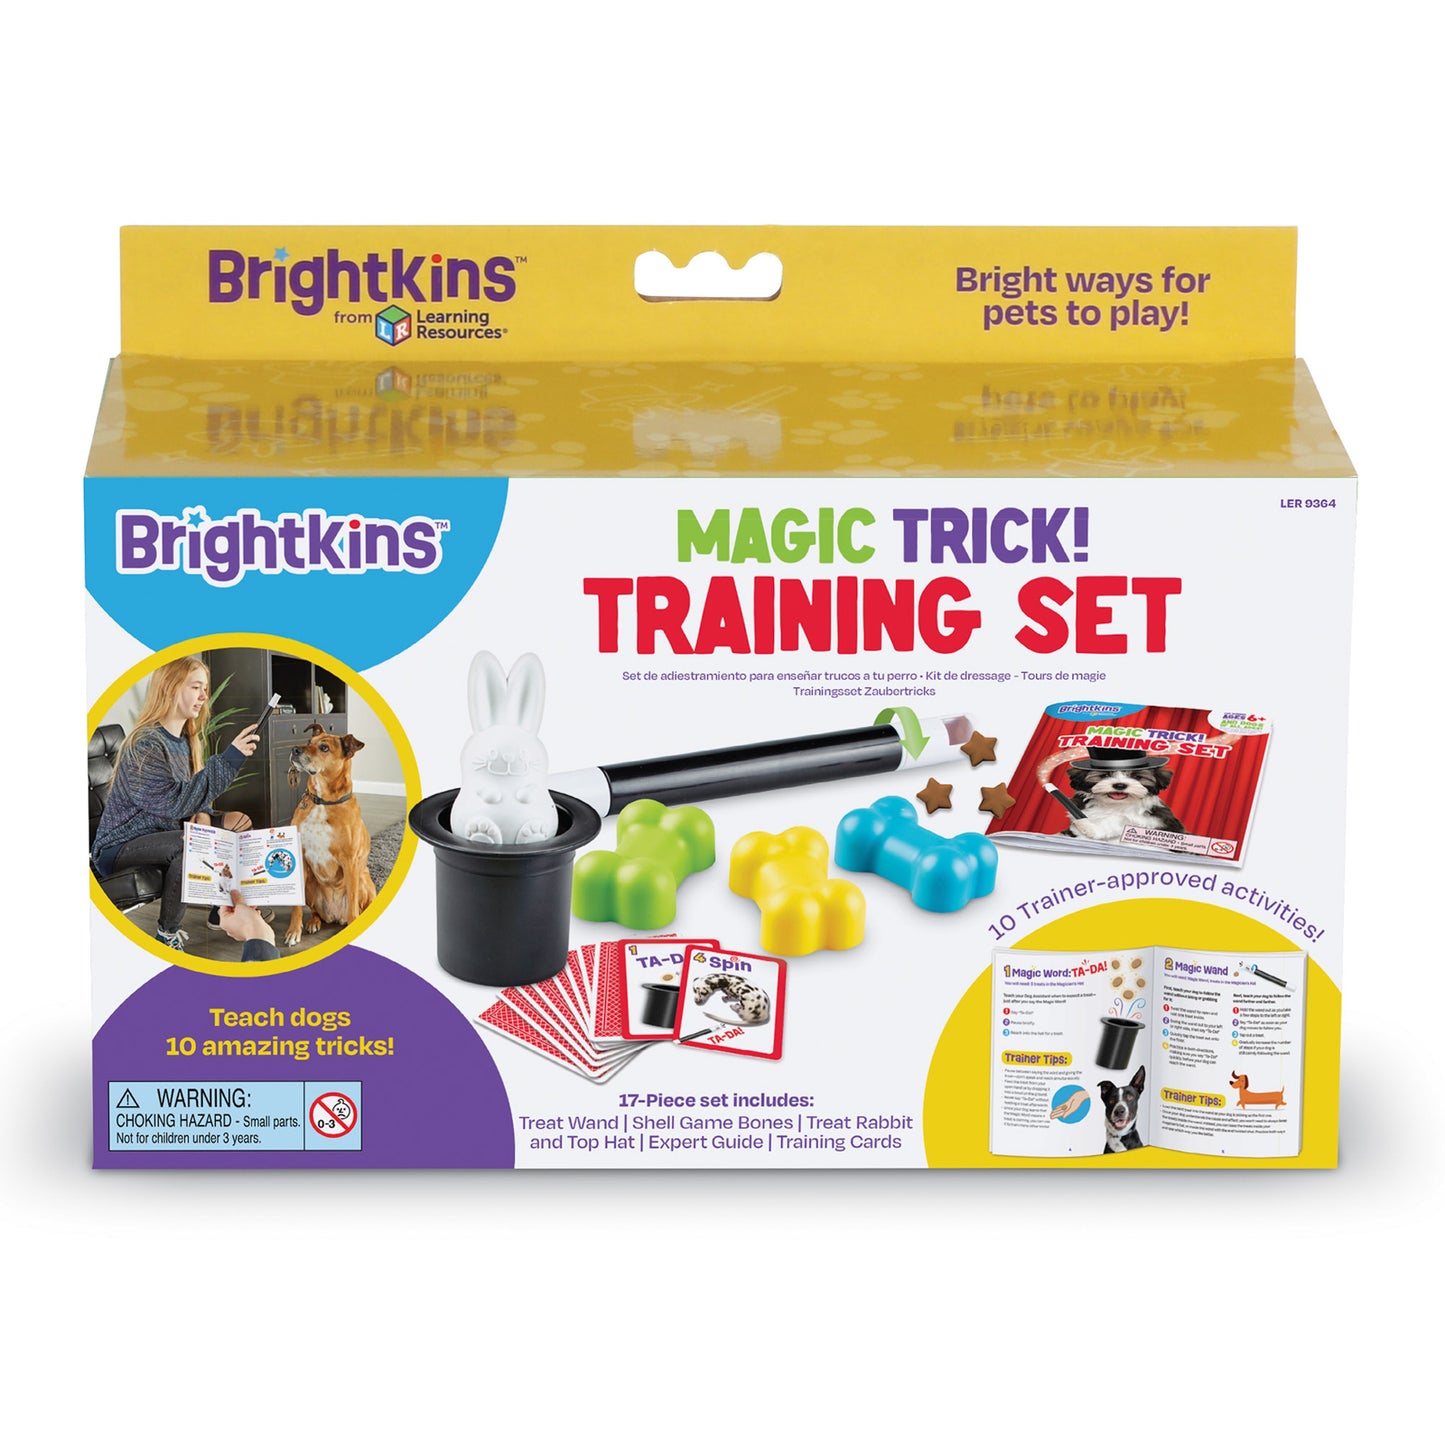 A product box for a Magic Trick Training Set for Dogs,